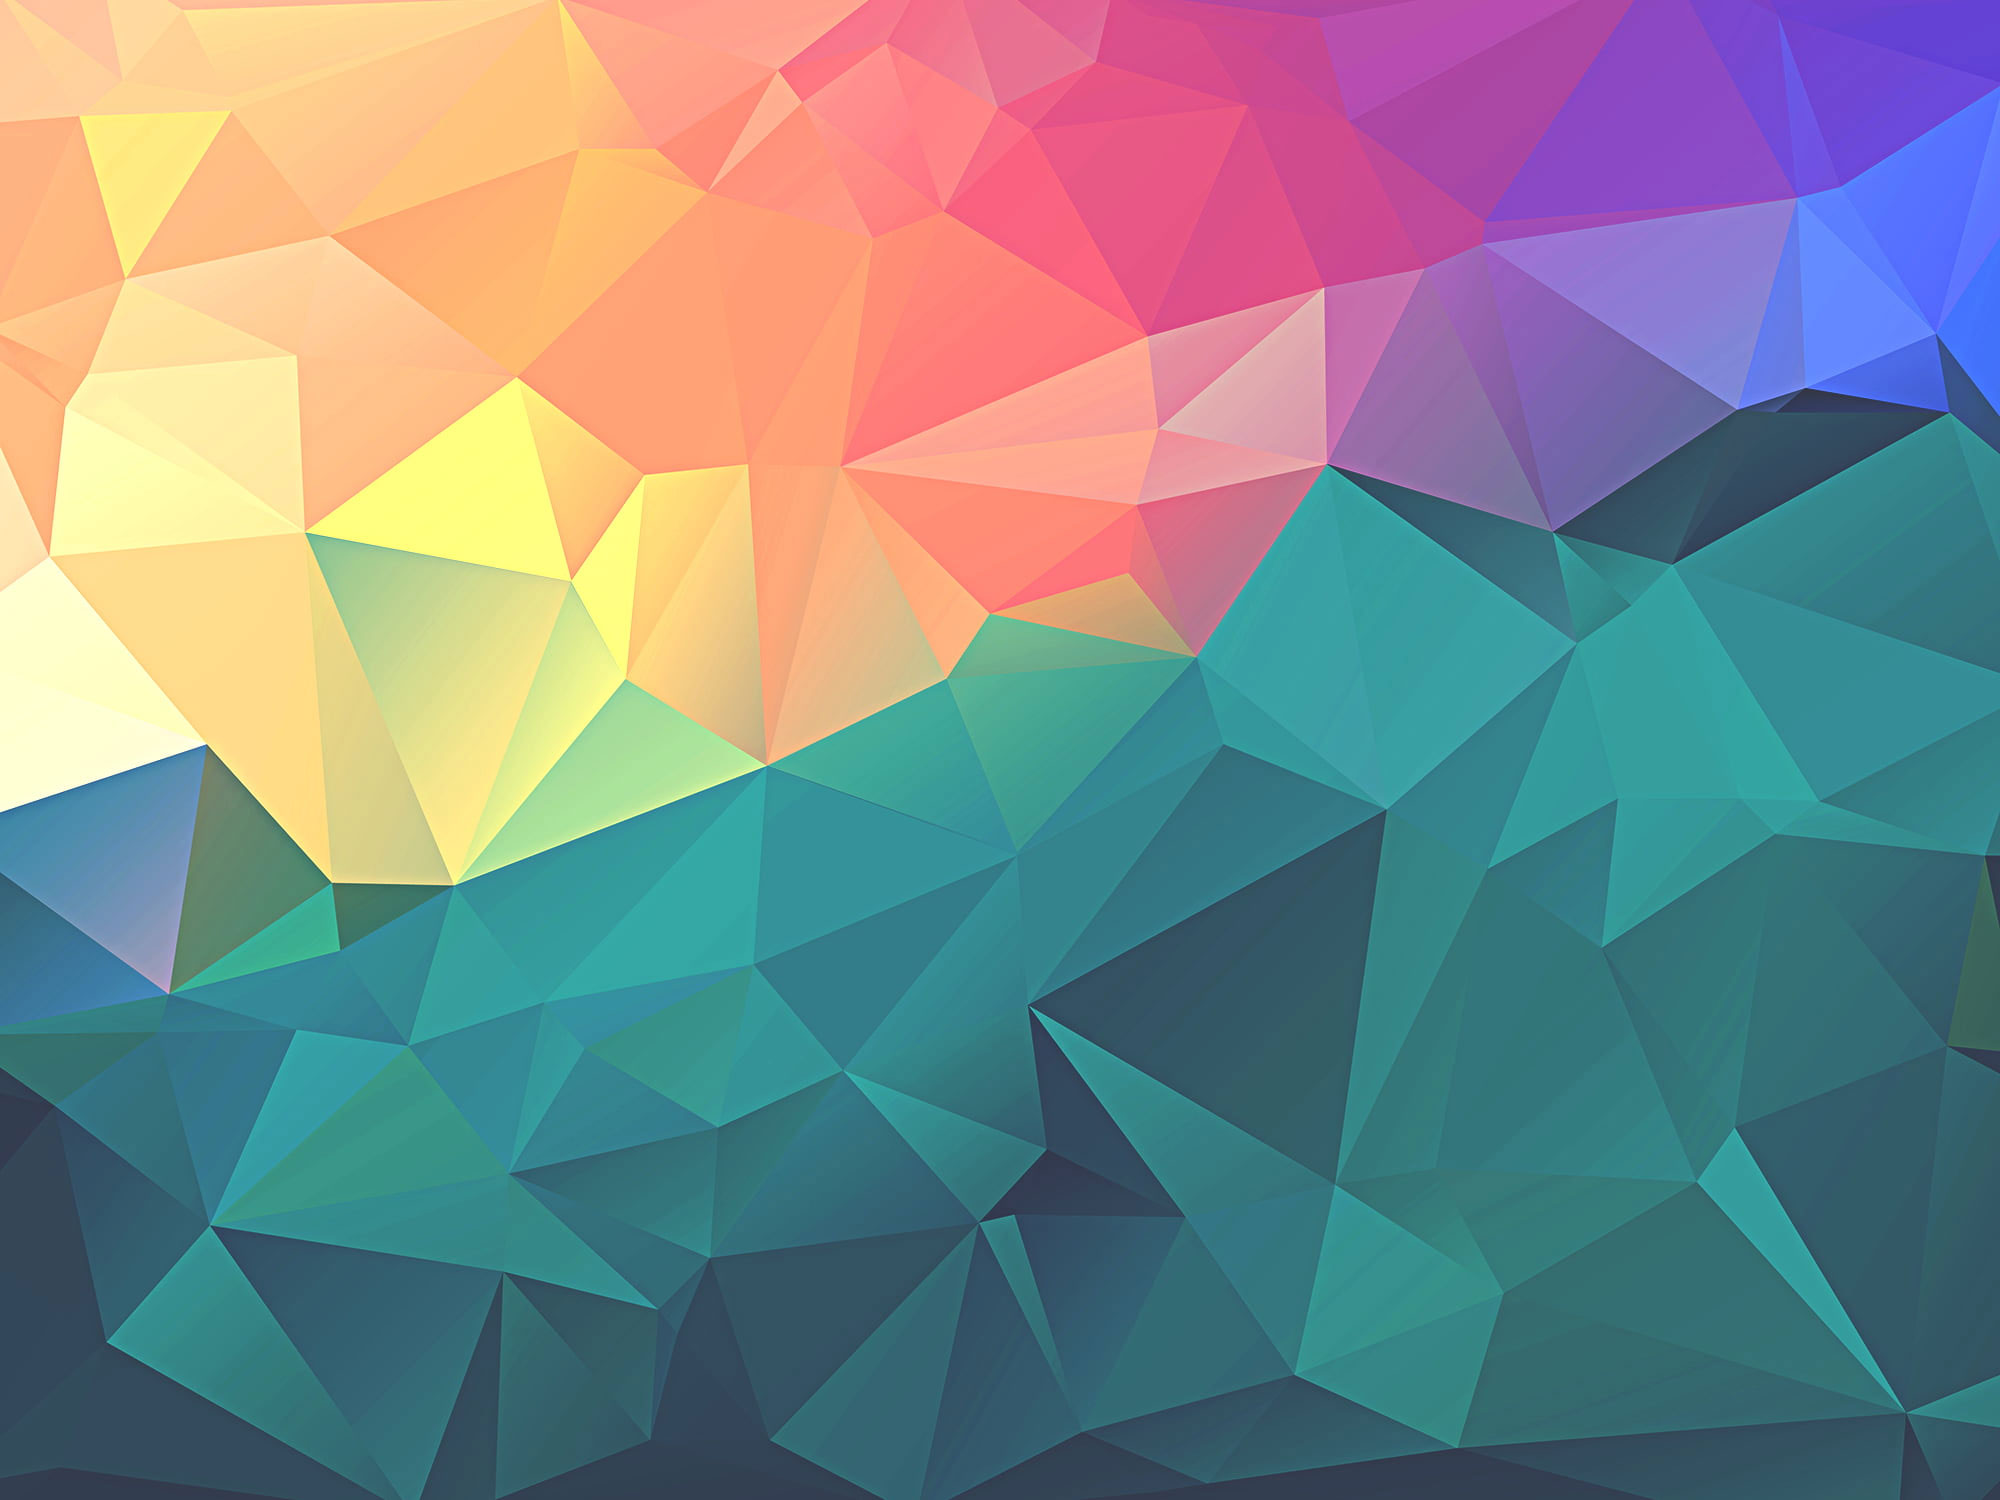 Teal and red illustration wallpaper, minimalism, colorful, polygon art